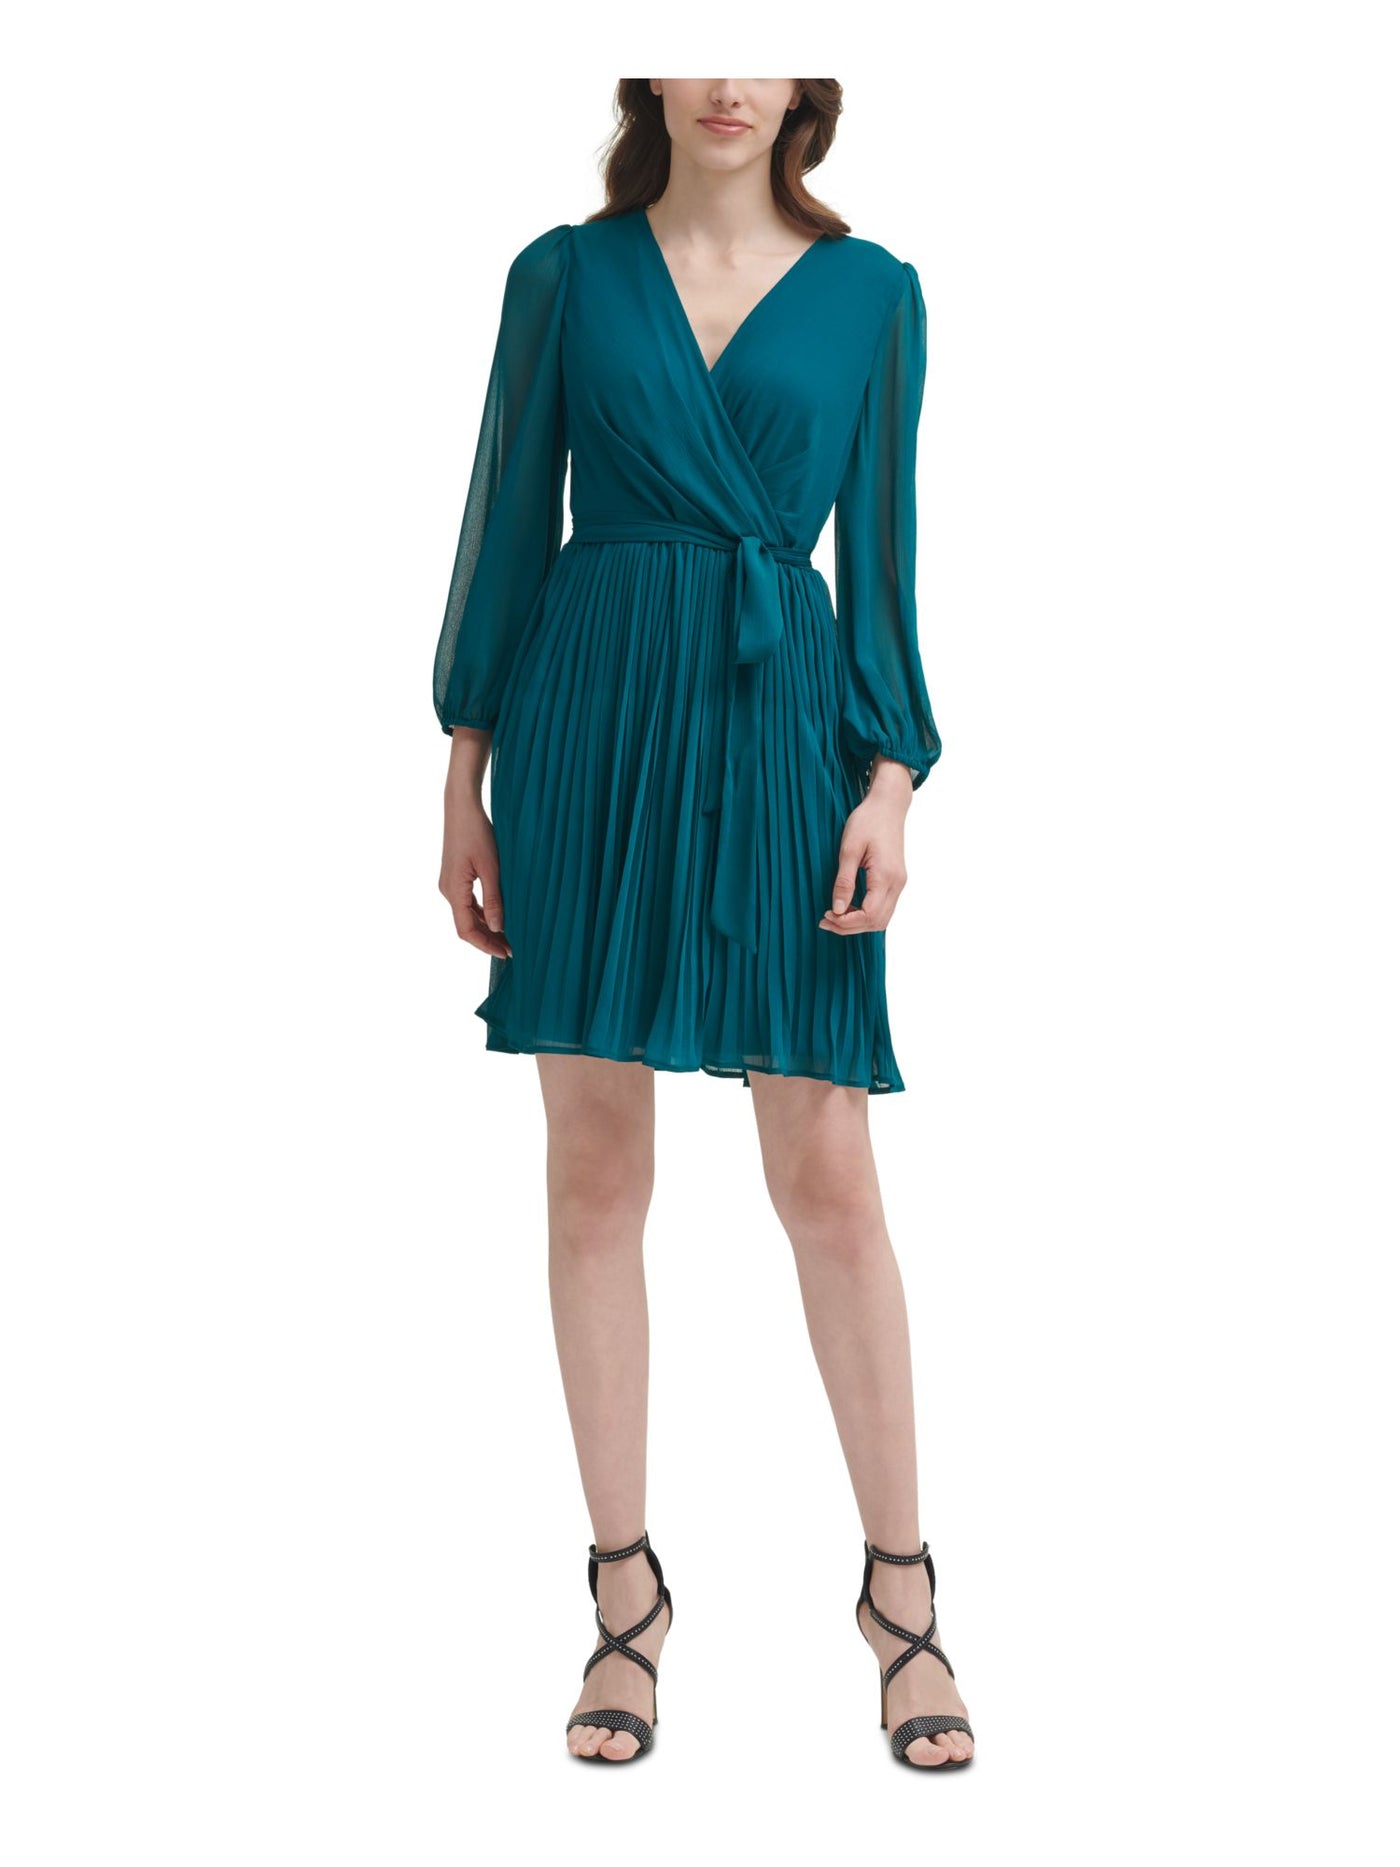 DKNY Womens Teal Tie Zippered Balloon Sleeve Surplice Neckline Above The Knee Cocktail Knife Pleated Dress 14